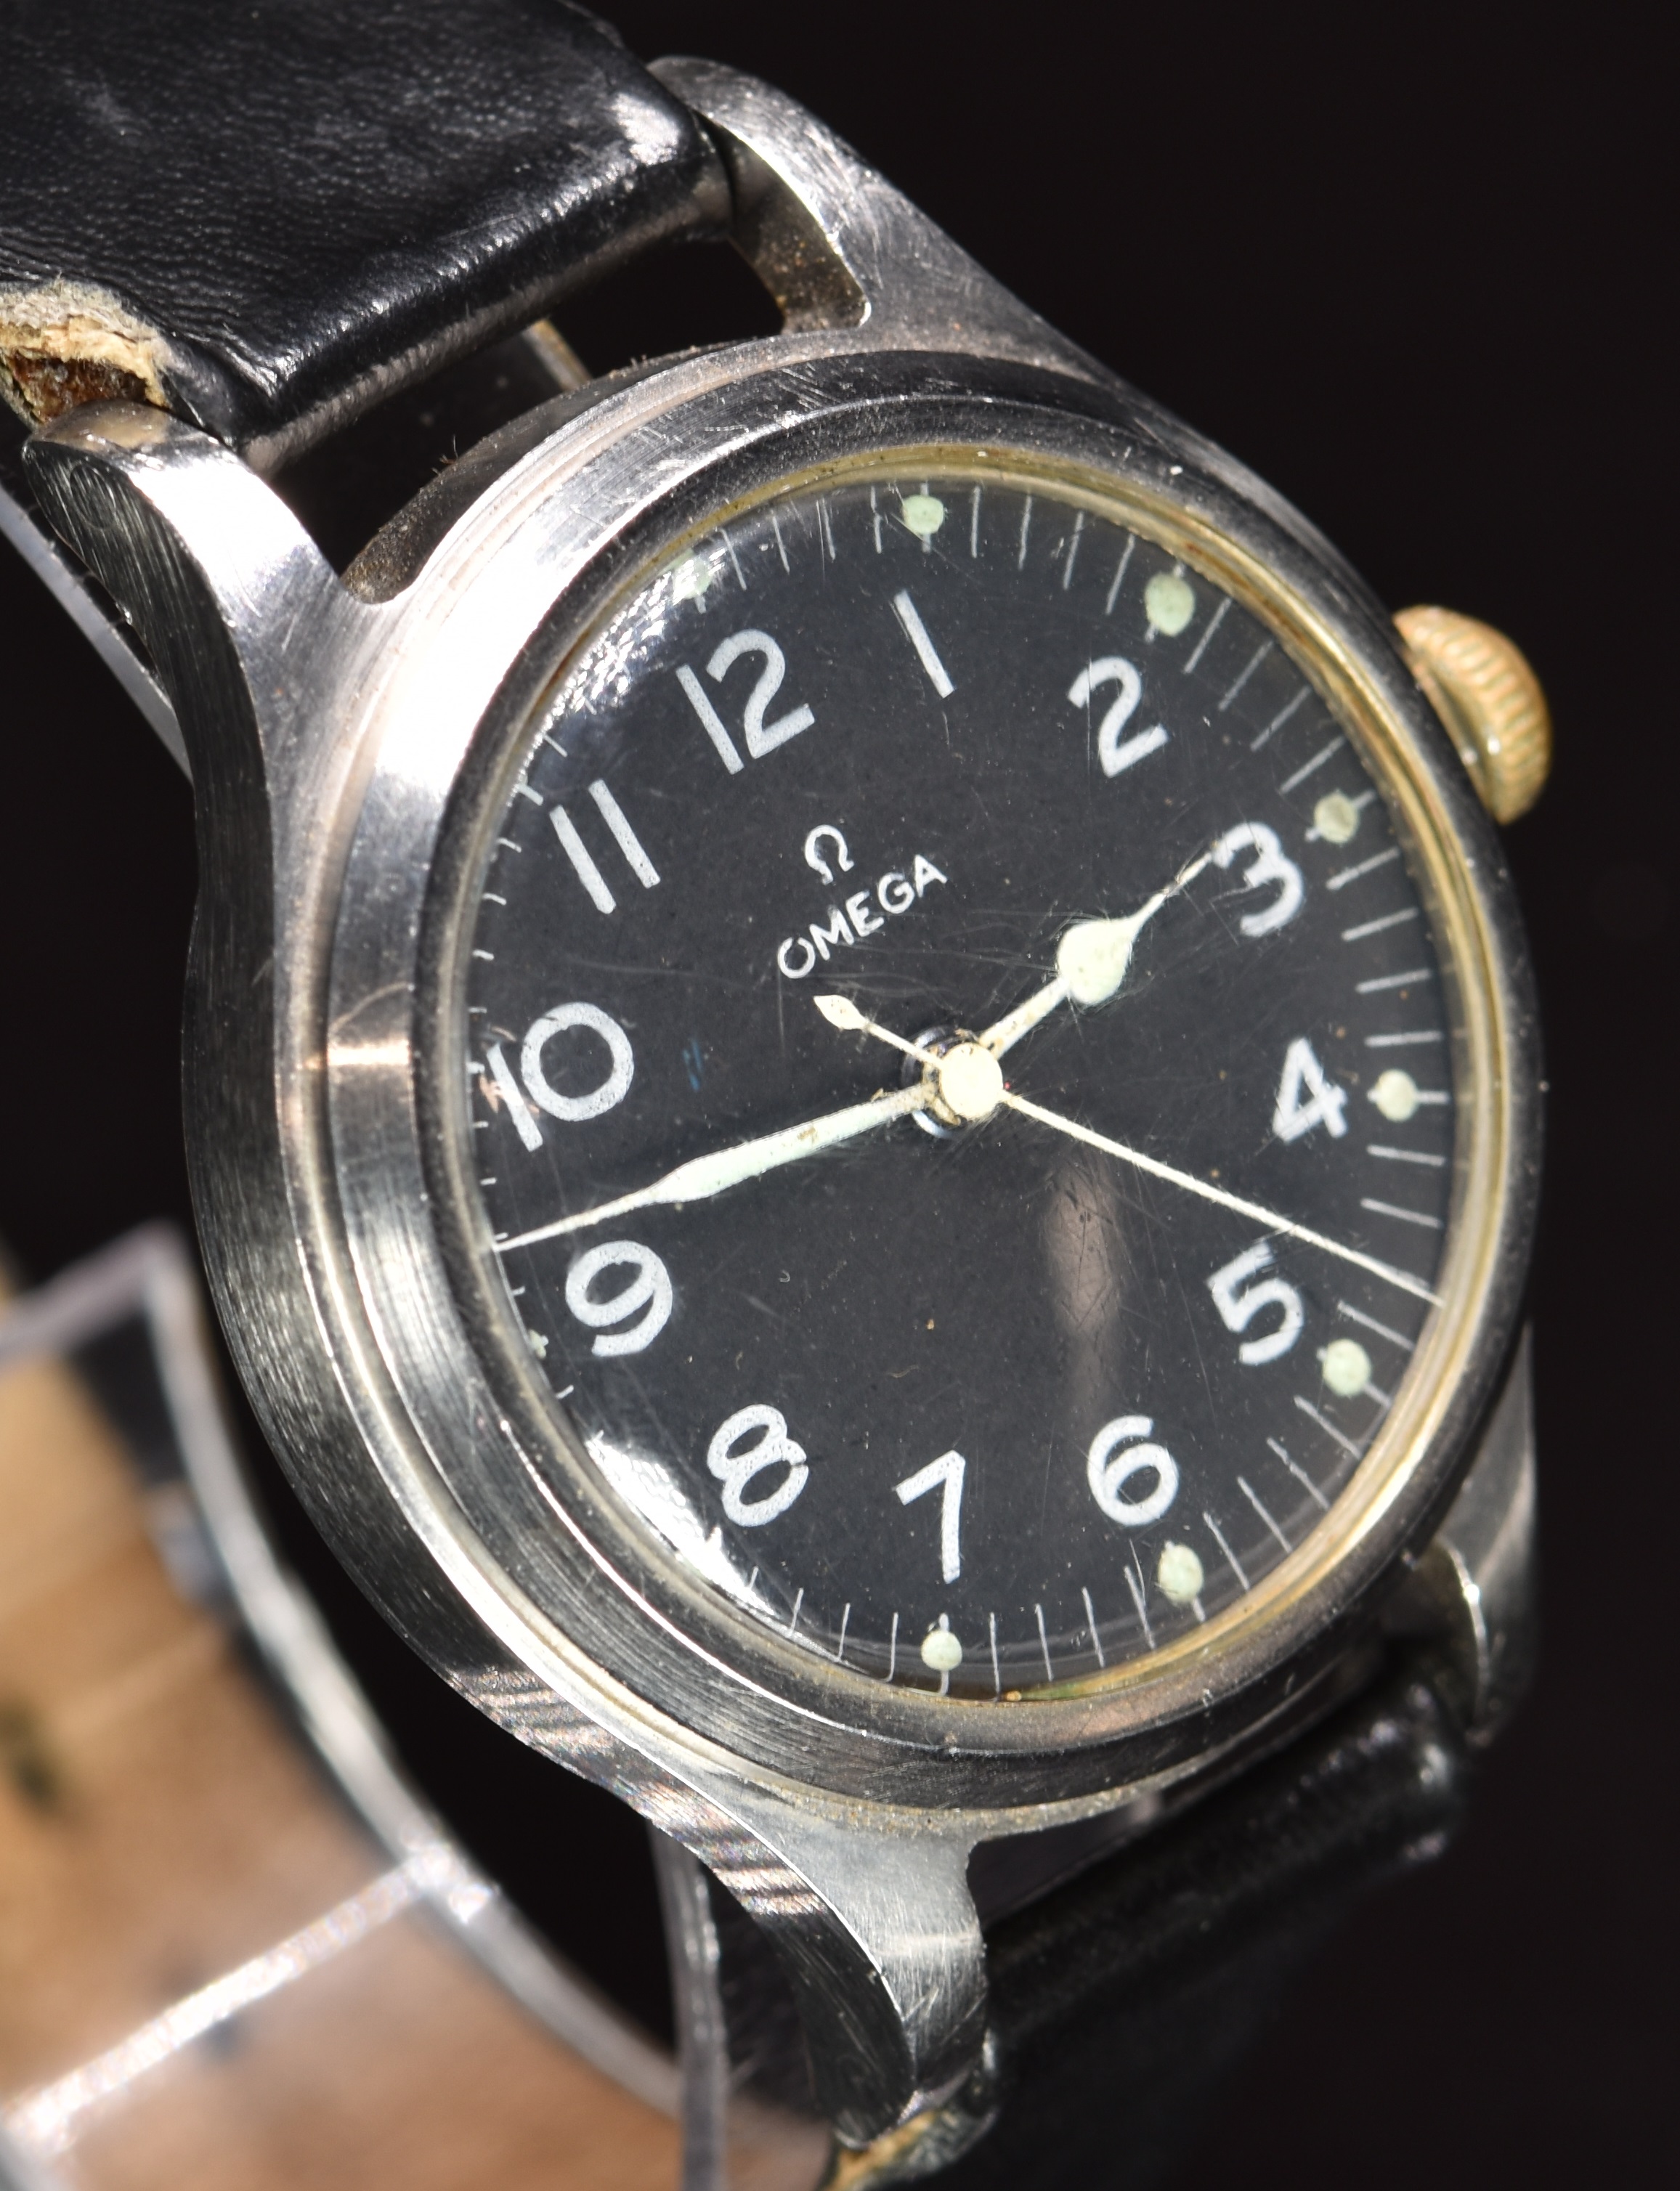 Omega British military issue wristwatch with luminous hands, white Arabic numerals, black dial, - Image 3 of 6